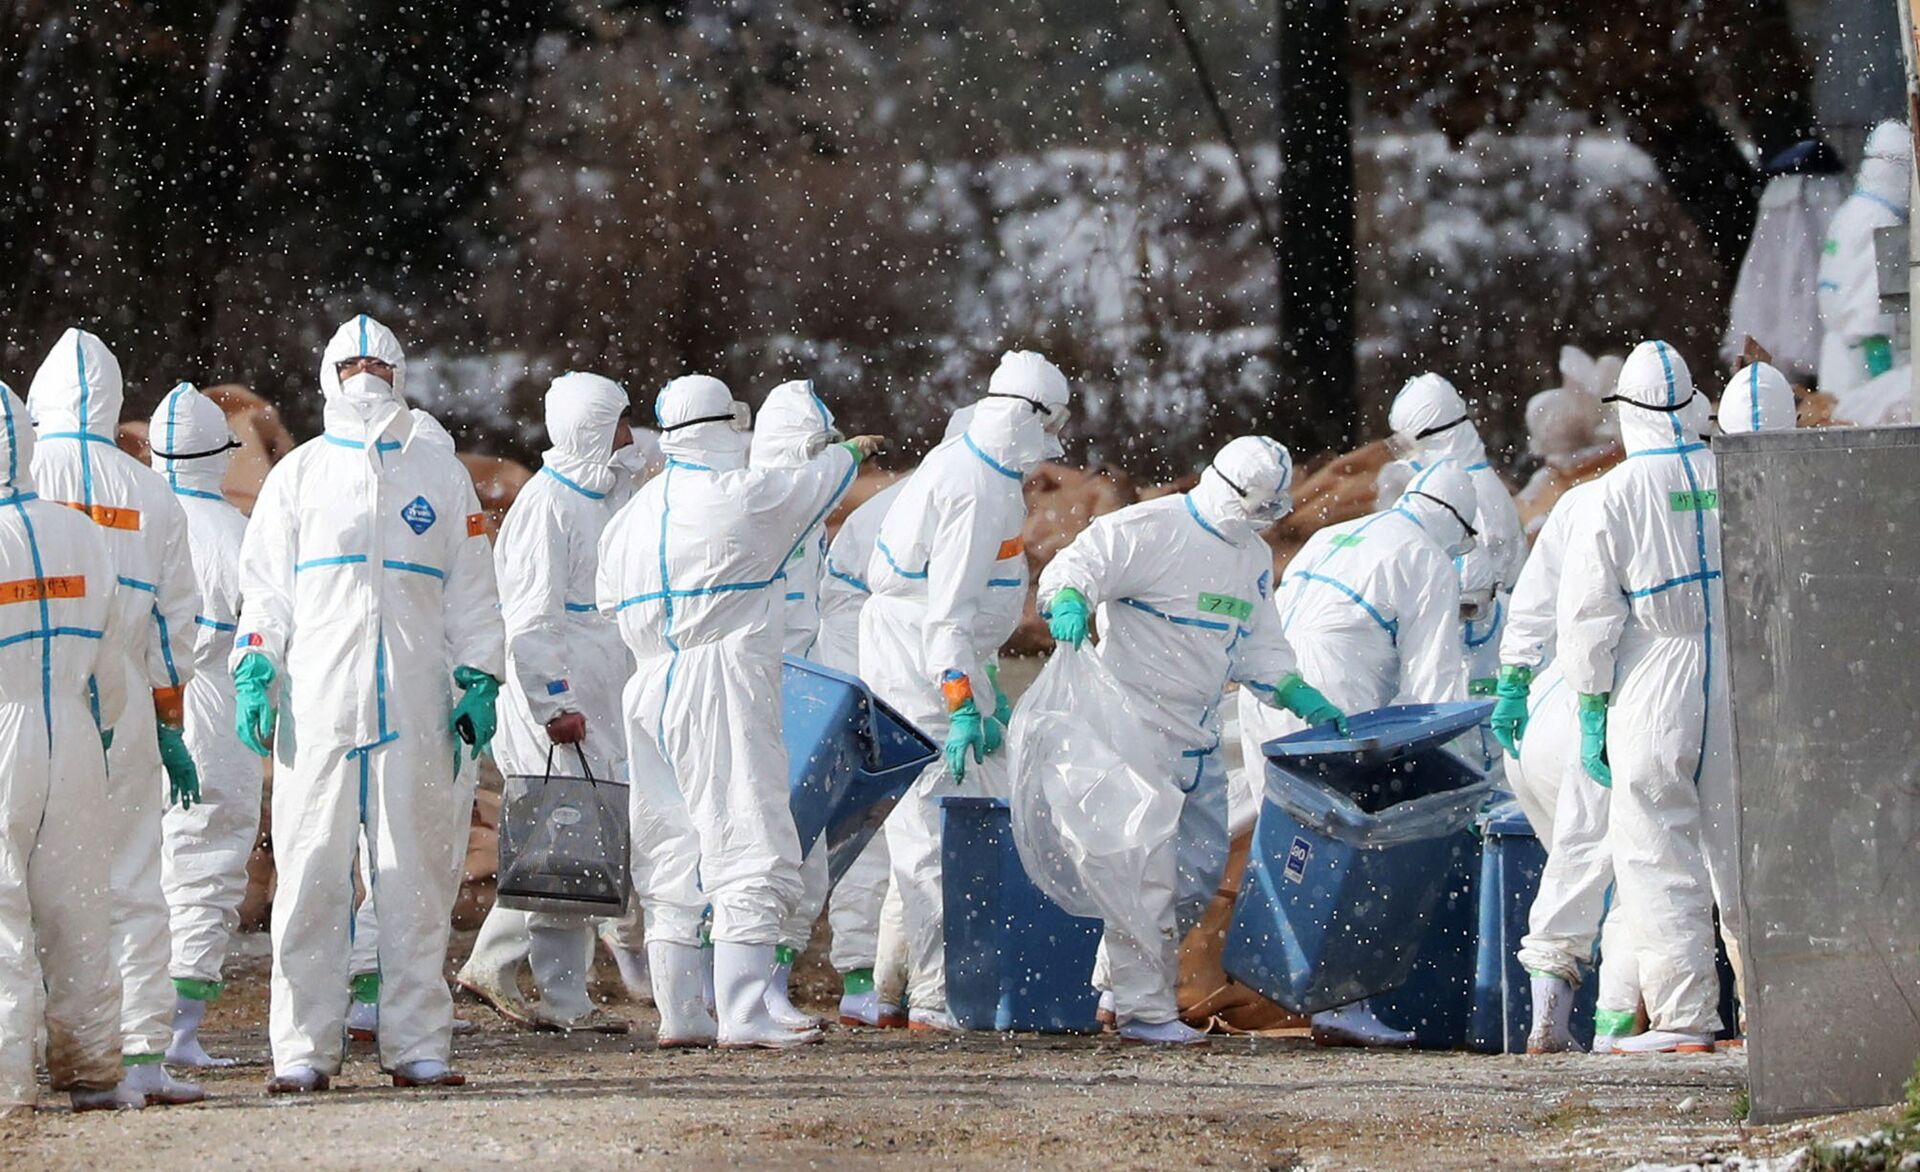 Japan's Chiba Prefecture to Cull Some 410,000 Chickens Over Bird Flu, Reports Say - Sputnik International, 1920, 06.02.2021